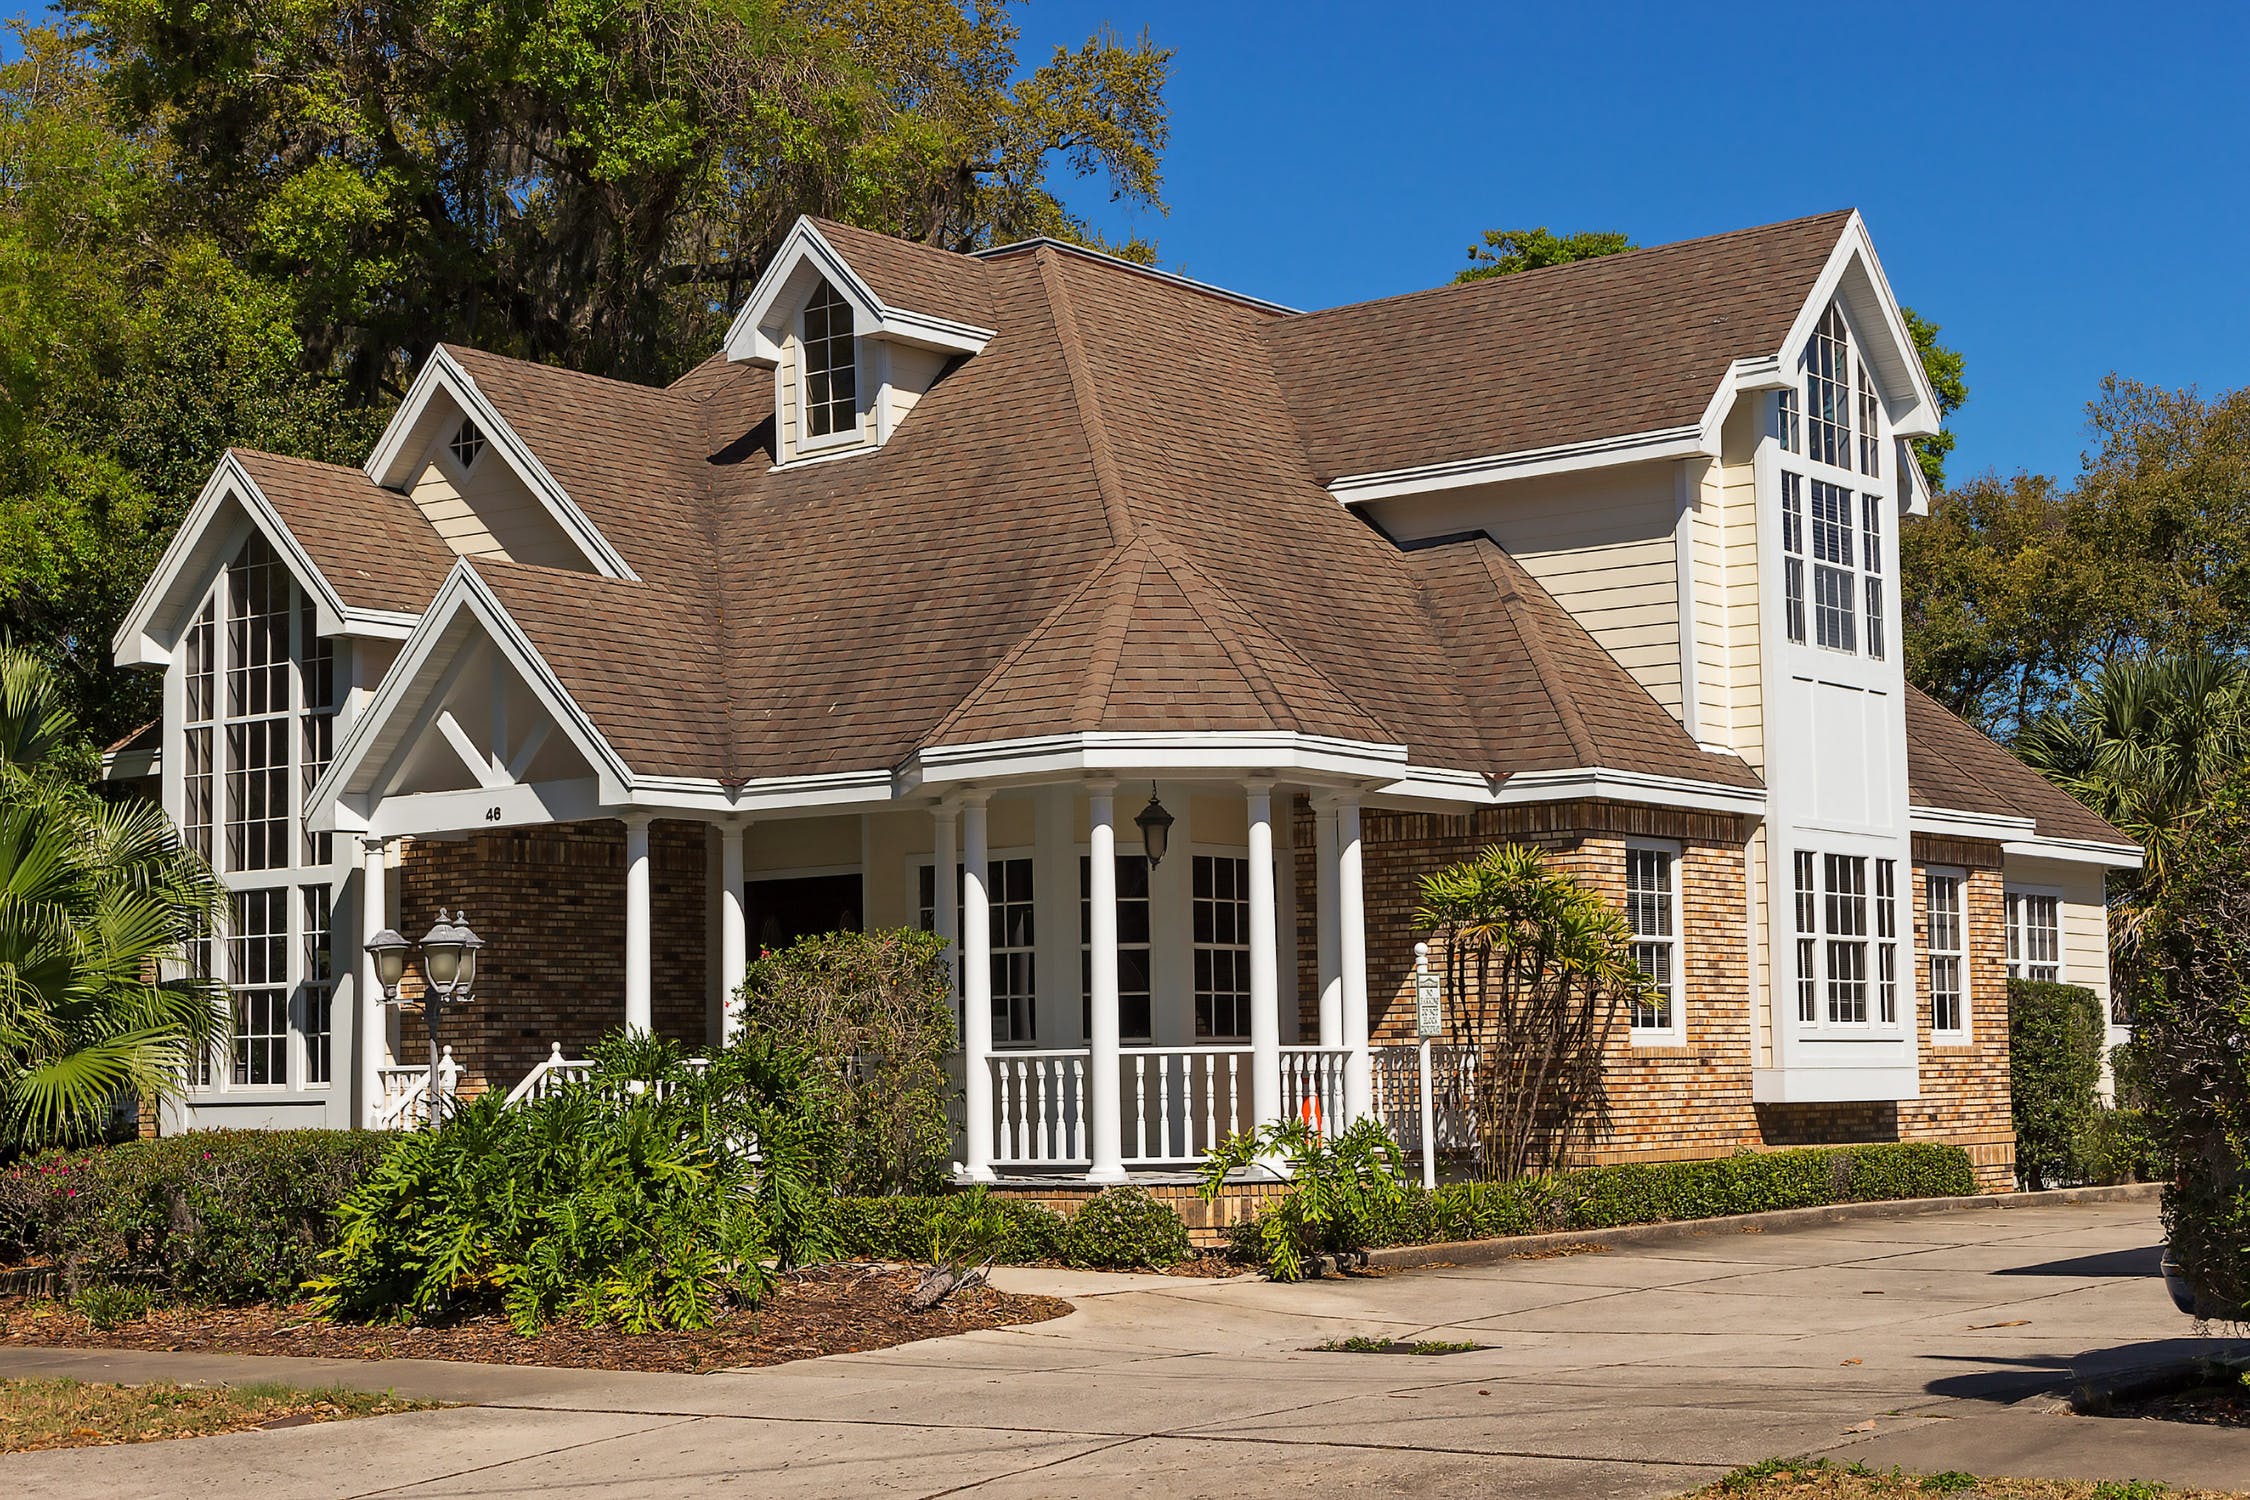 Knowing Your Roof: A Homeowner's Responsibility